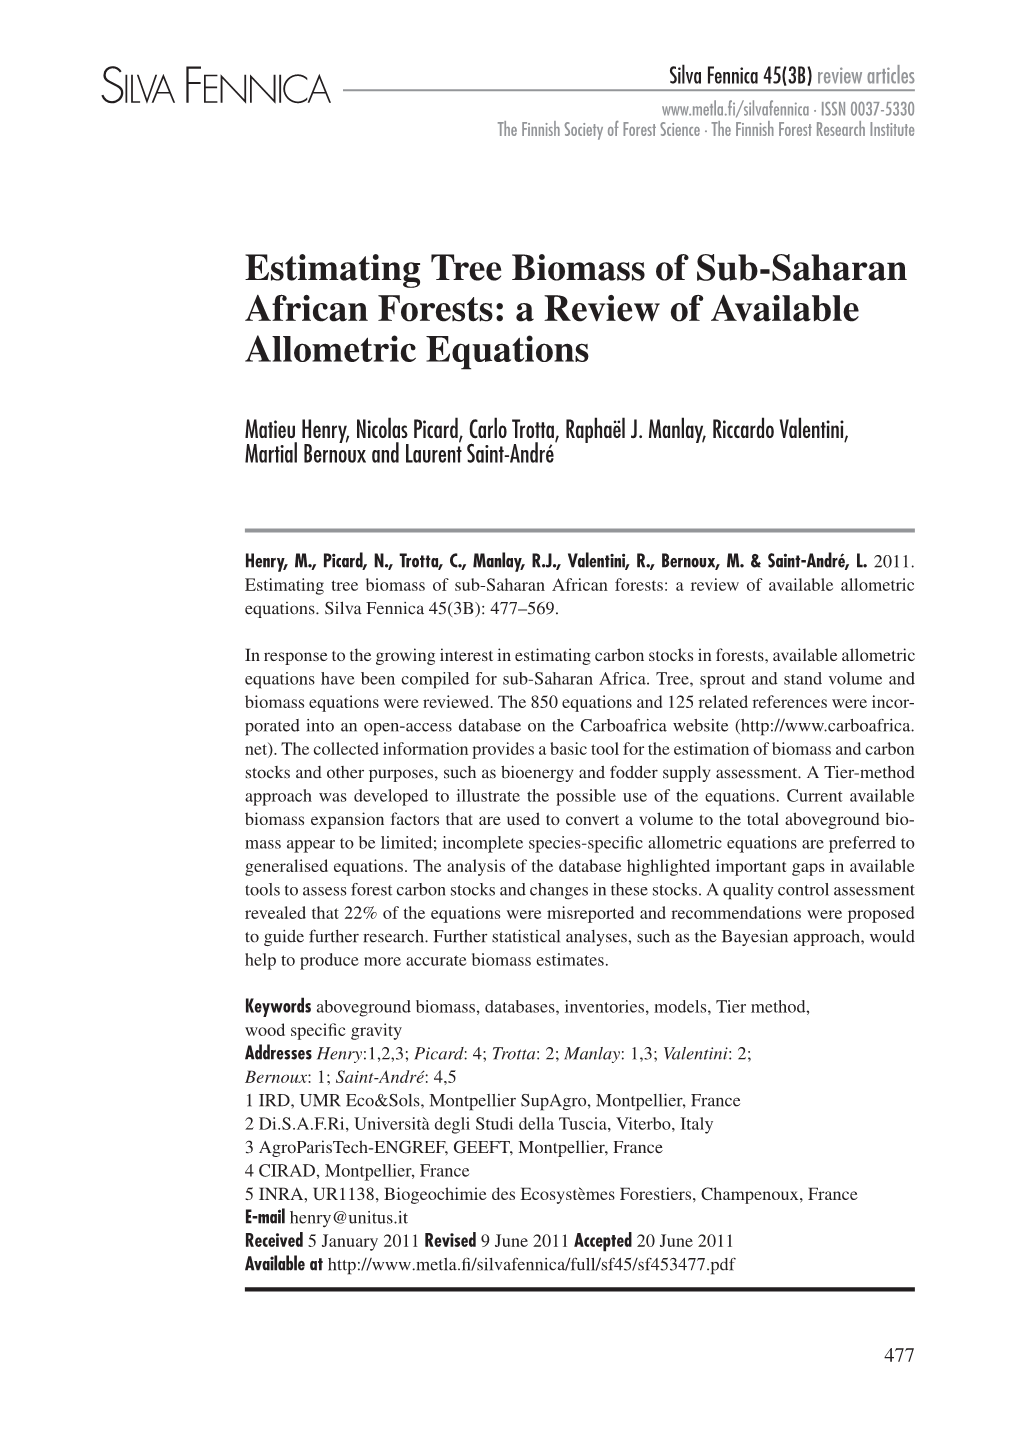 Estimating Tree Biomass of Sub-Saharan African Forests: a Review of Available Allometric Equations